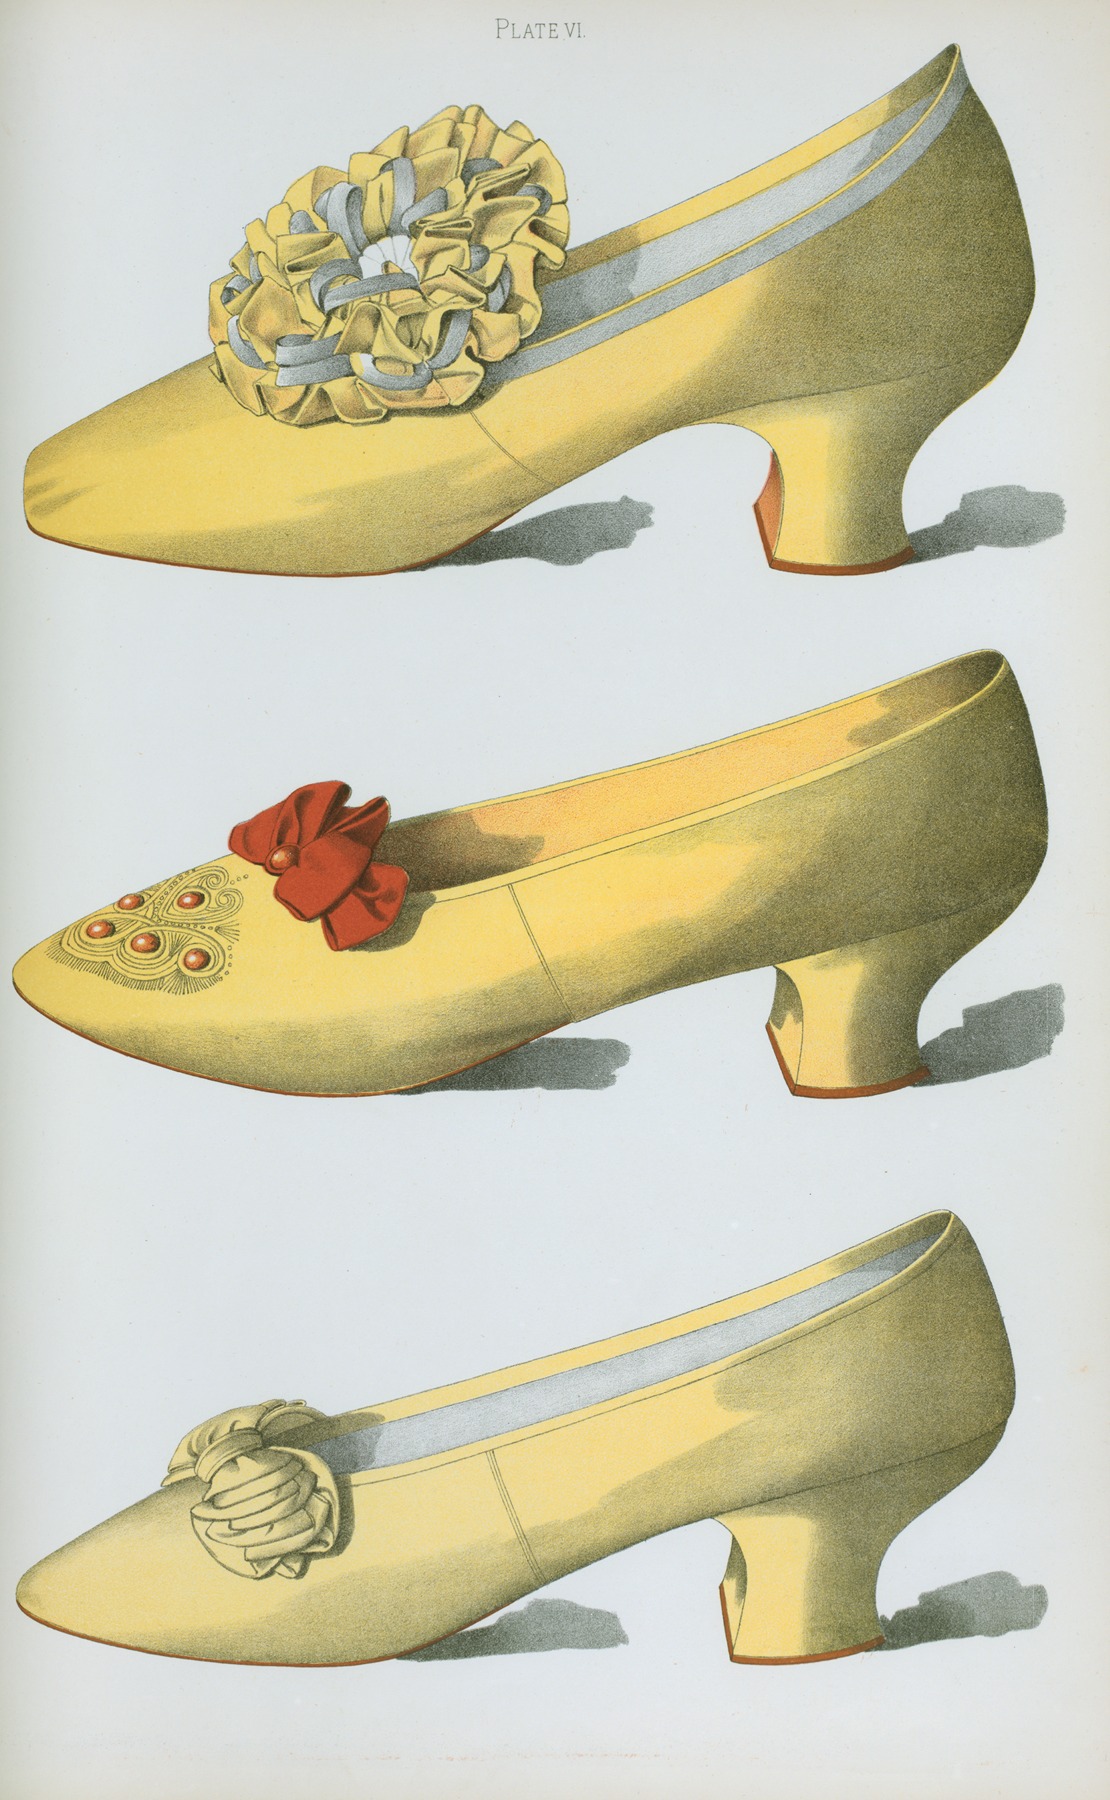 T. Watson Greig - Two yellow satin shoes, the first worn on stage by the actress Miss Ada Cavendish, and one straw colored shoe